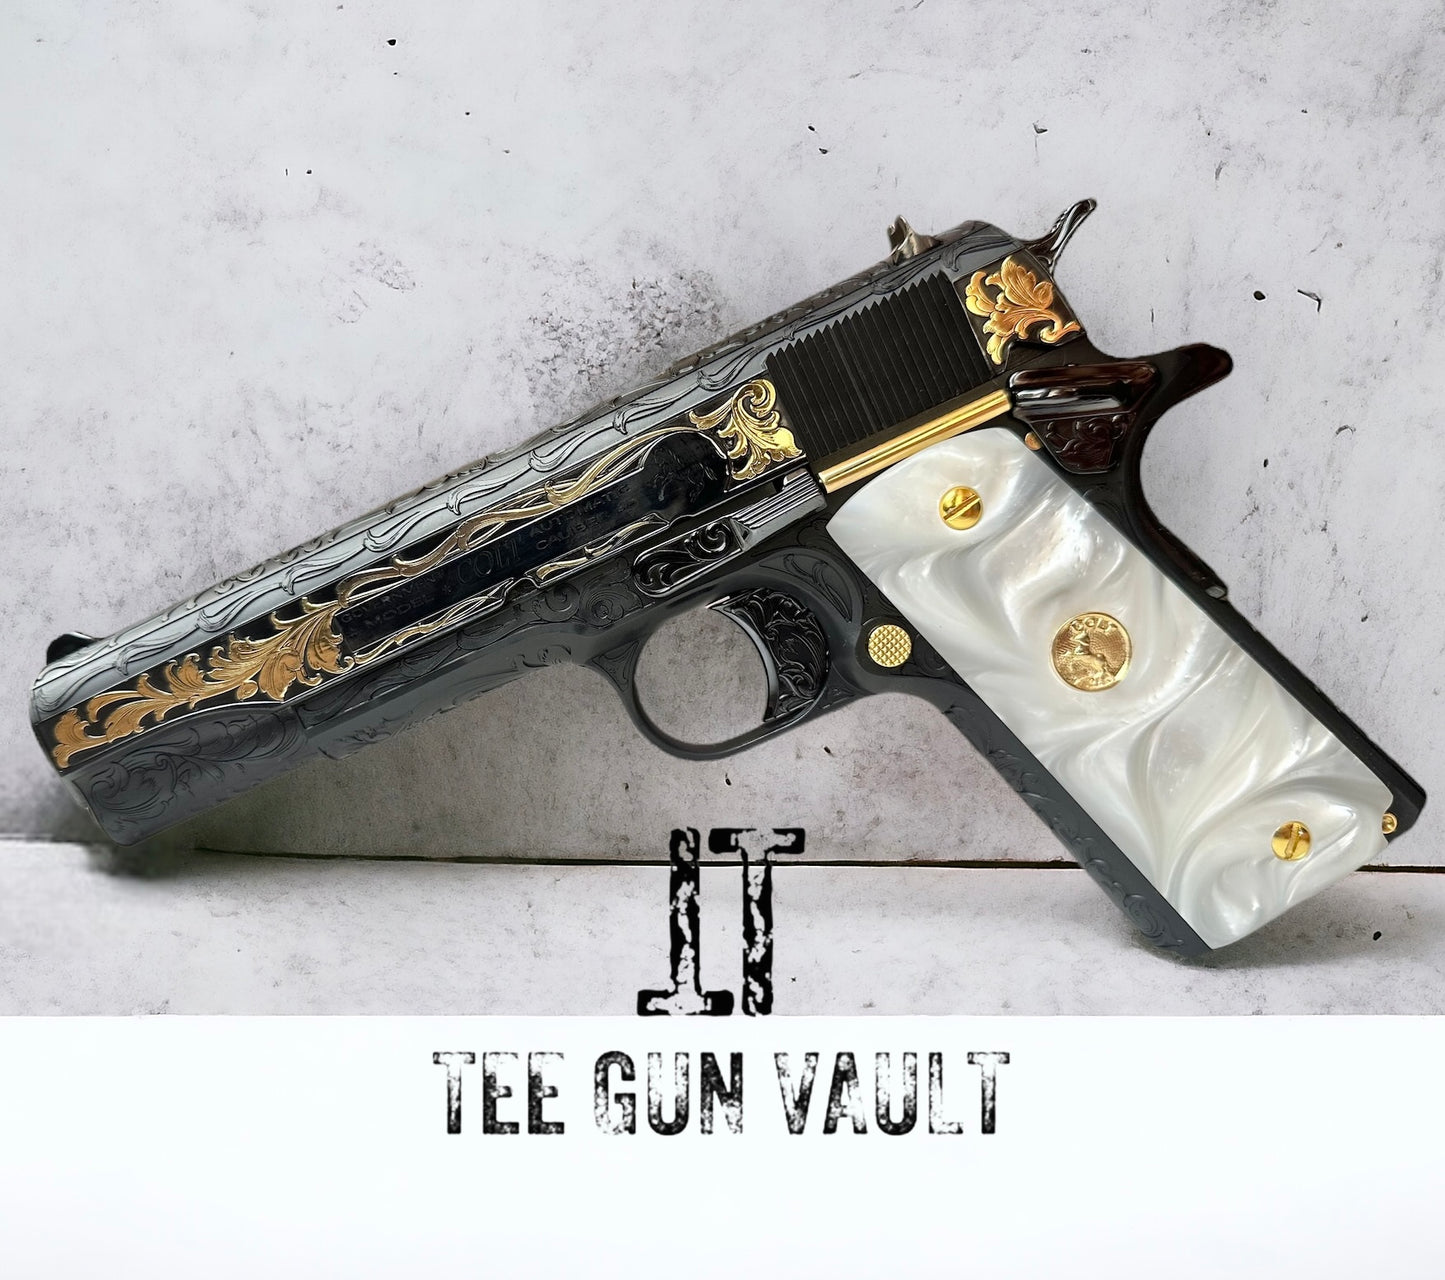 CUSTOM COLT 1911 GOVERNMENT FULLY ENGRAVED, BLUED WITH 24K GOLD PLATED ACCENTS